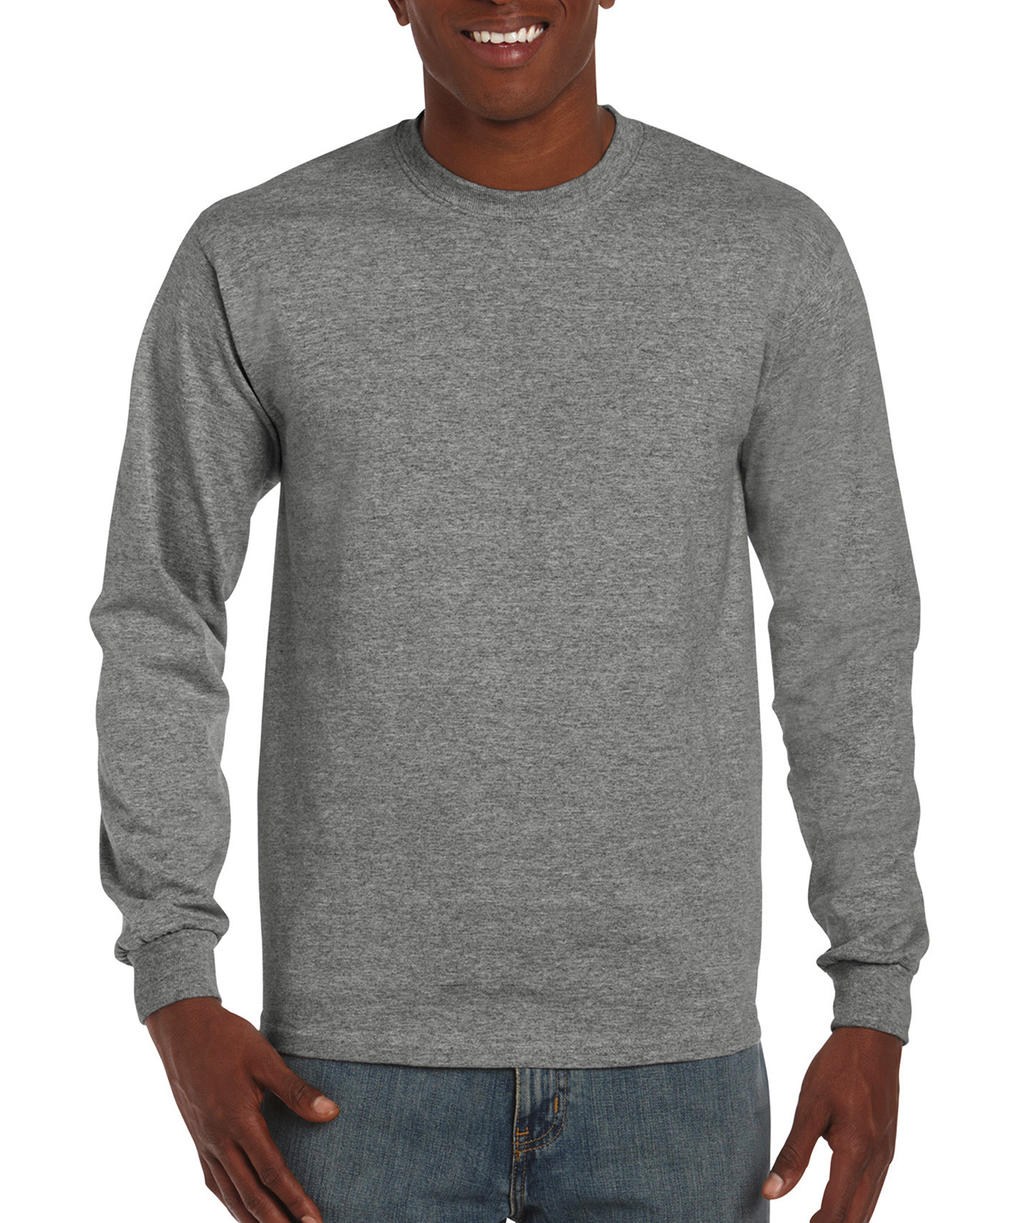  Hammer? Adult Long Sleeve T-Shirt in Farbe Graphite Heather